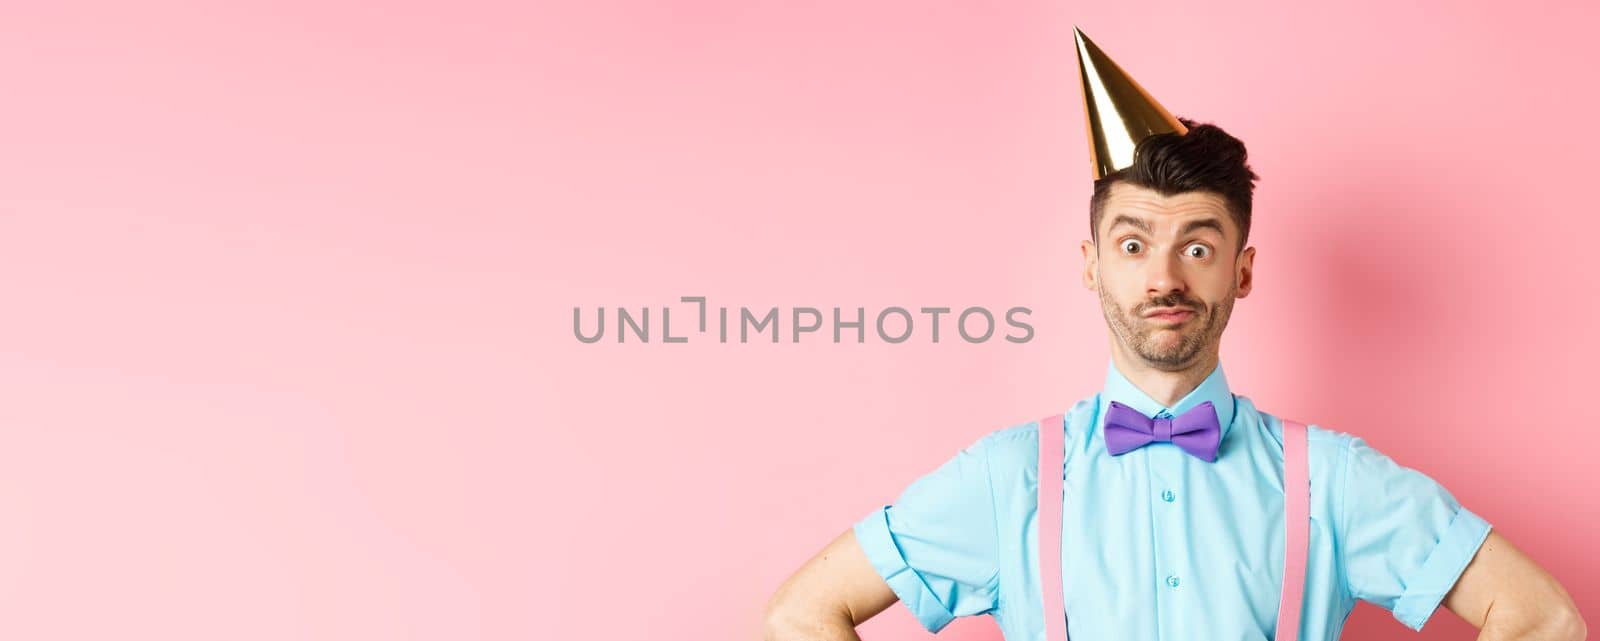 Holidays and celebration concept. Close-up of confused male entertainer in party hat and bow-tie, looking puzzled and shocked, standing over pink background.